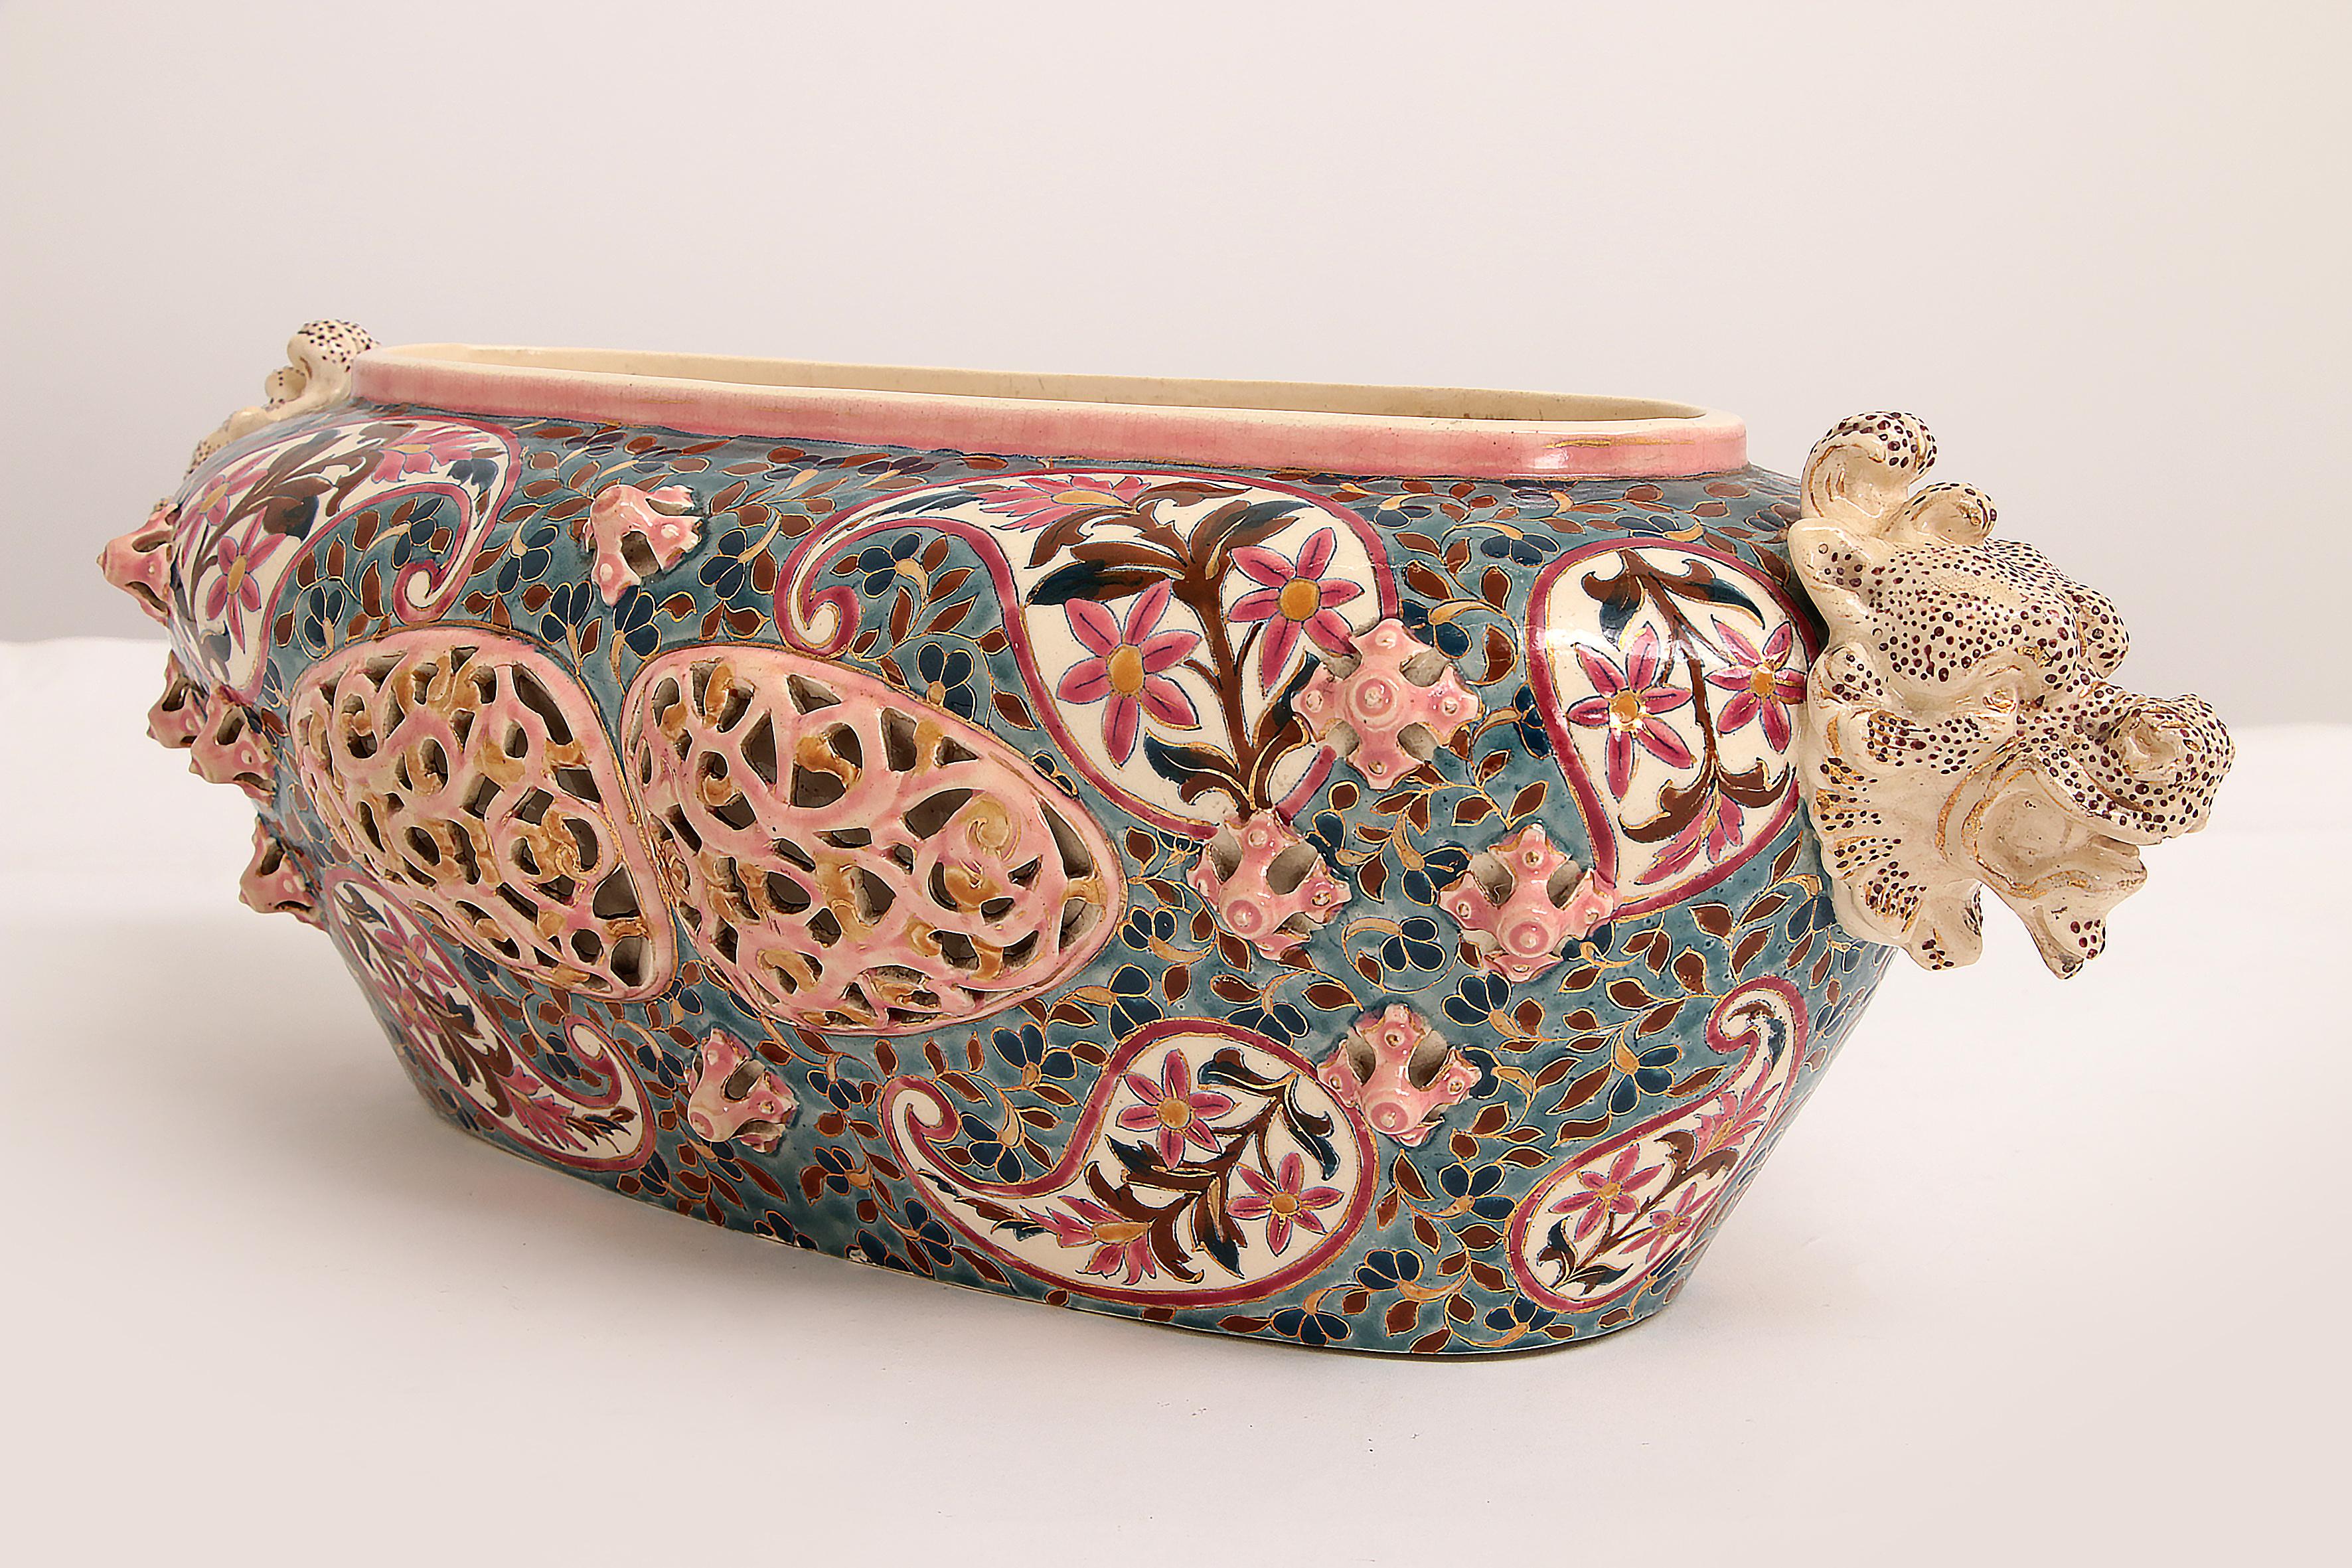 Fischer Budapest Bowl with Beautiful Colors and Dragon Heads, 19th Century 2